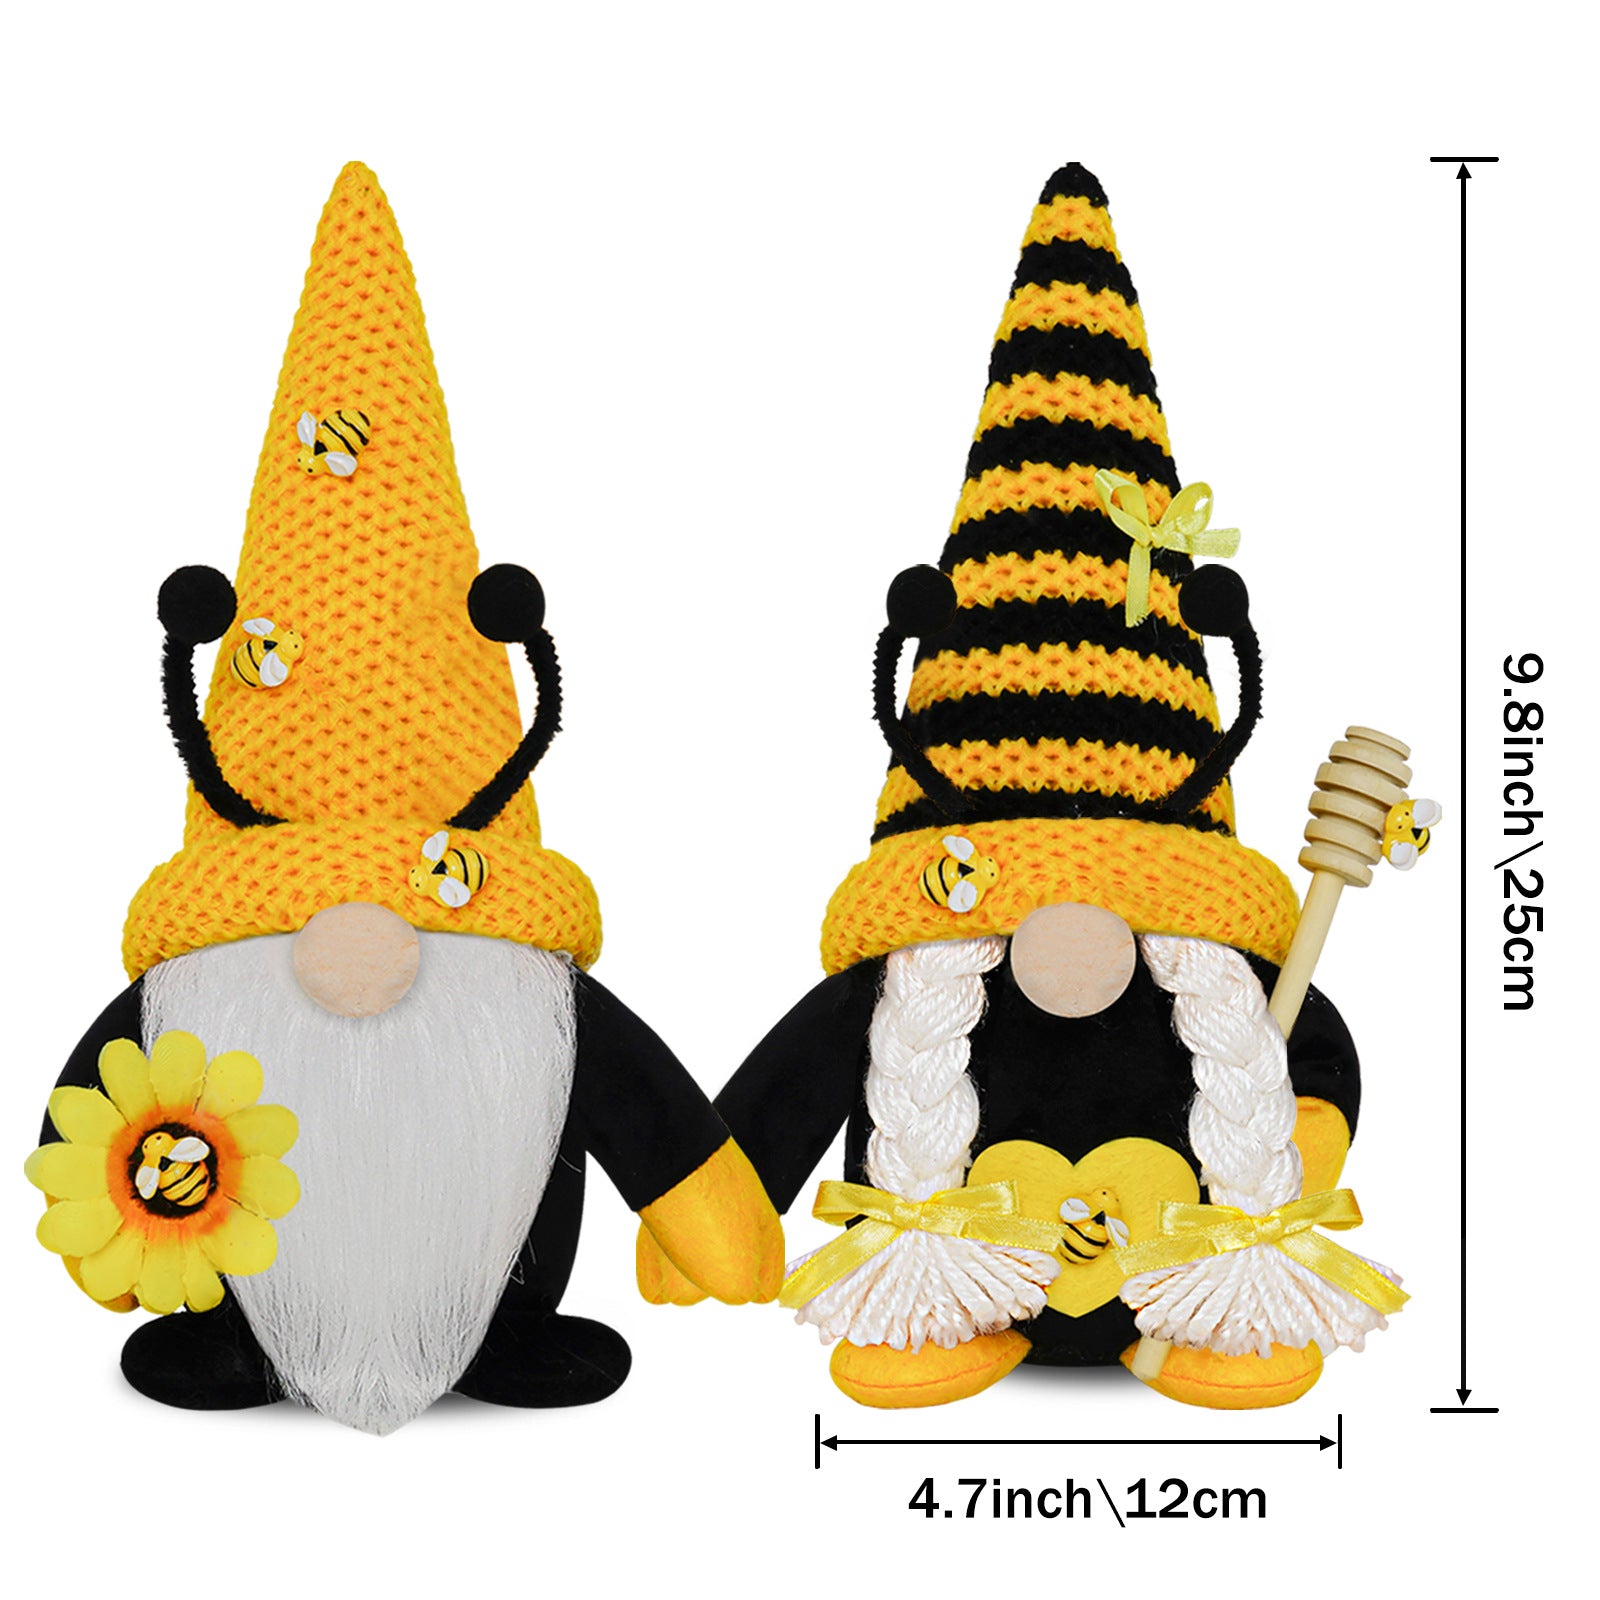 Bee Festival Faceless Rudolf Knitted Bee Old Man Festival Sun-facing Figurine Doll Decoration, Bee gnomes, Beekeeper gnomes, Honey gnomes, Bumblebee gnomes, Beehive gnomes, Pollen gnomes, Garden gnomes, Spring gnomes, Flower gnomes, Nature gnomes, Decorative gnomes, Rustic gnomes, Festive gnomes, Yellow and black gnomes, Bee-friendly gnomes, Happy bees gnomes,